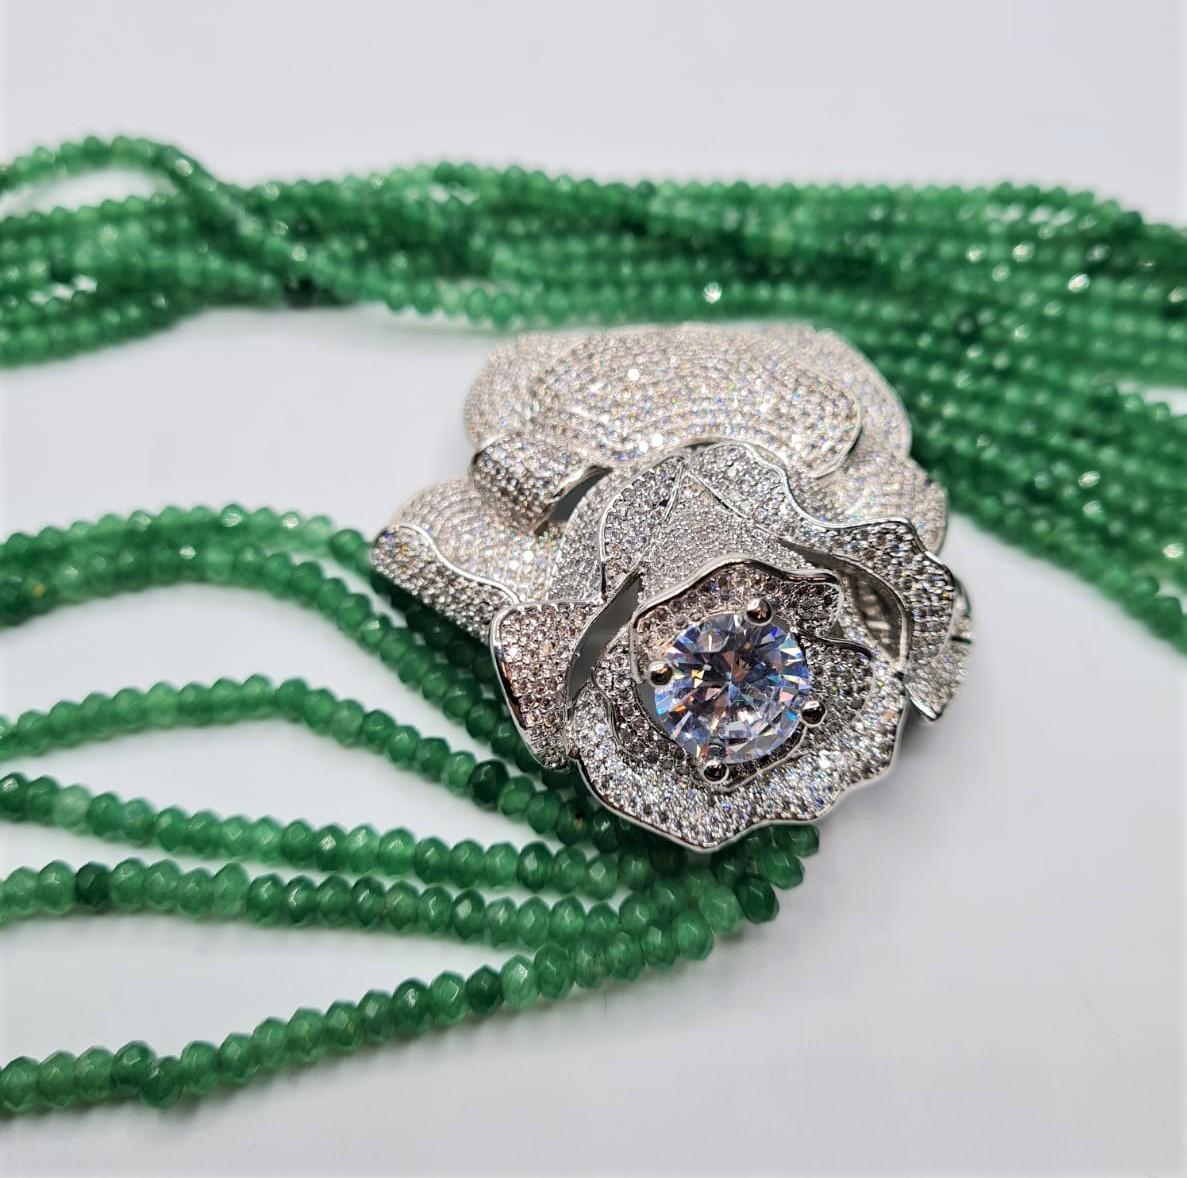 An impressive six row faceted emerald necklace with a white metal and cubic zirconia ornamental - Image 4 of 4